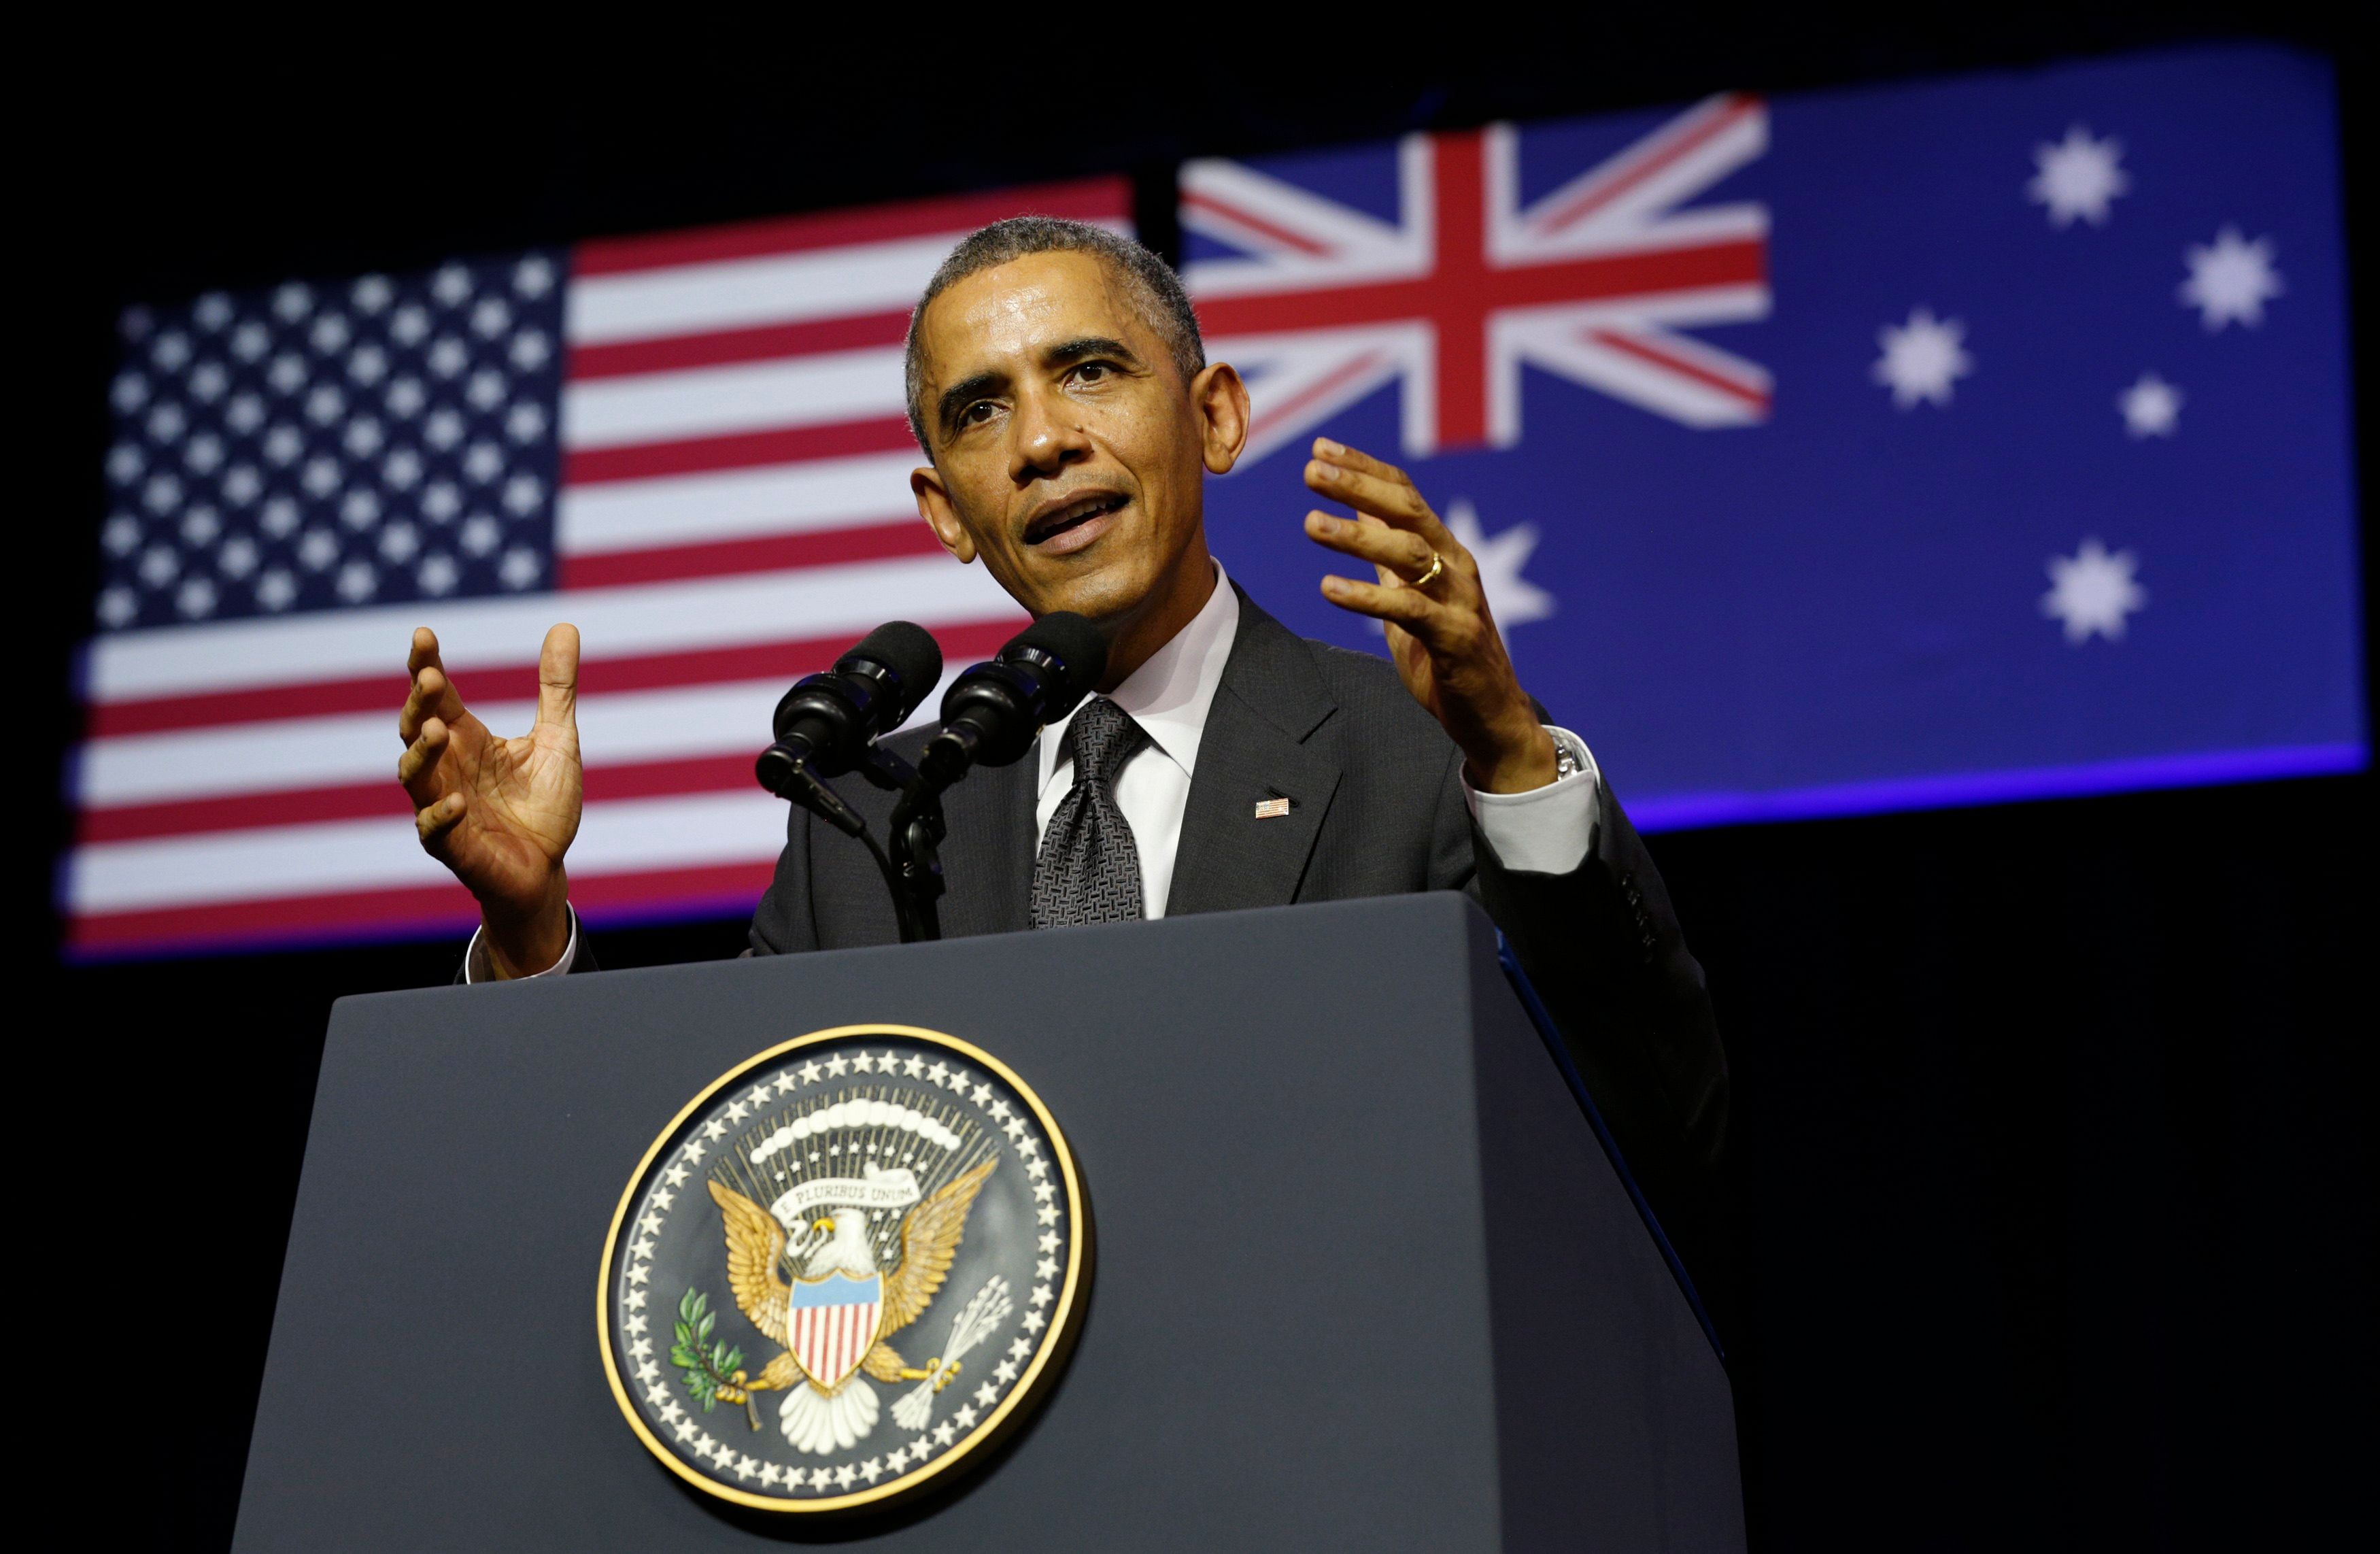 US President Barack Obama speaks at the University of Queensland in Brisbane November 15, 2014. Obama is in Brisbane for the G20 Summit being held here this weekend. Photo: Reuters